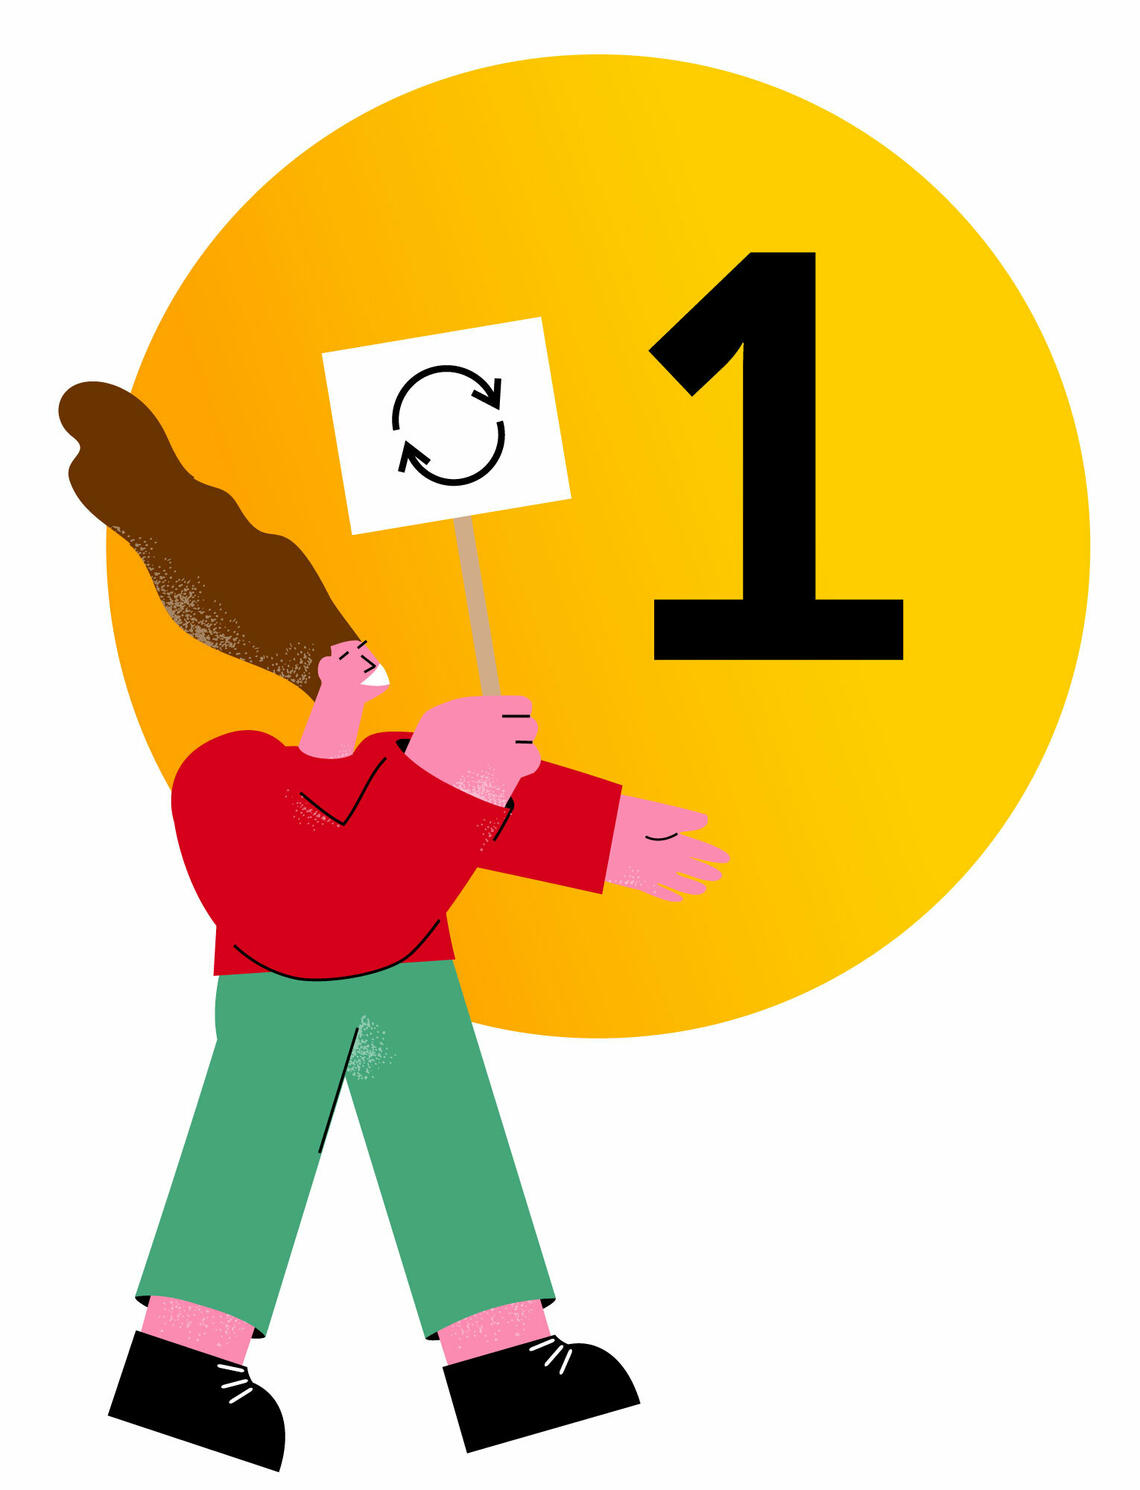 Section one. An illustration of a person holding a cycle sign with a one in a circle behind them.